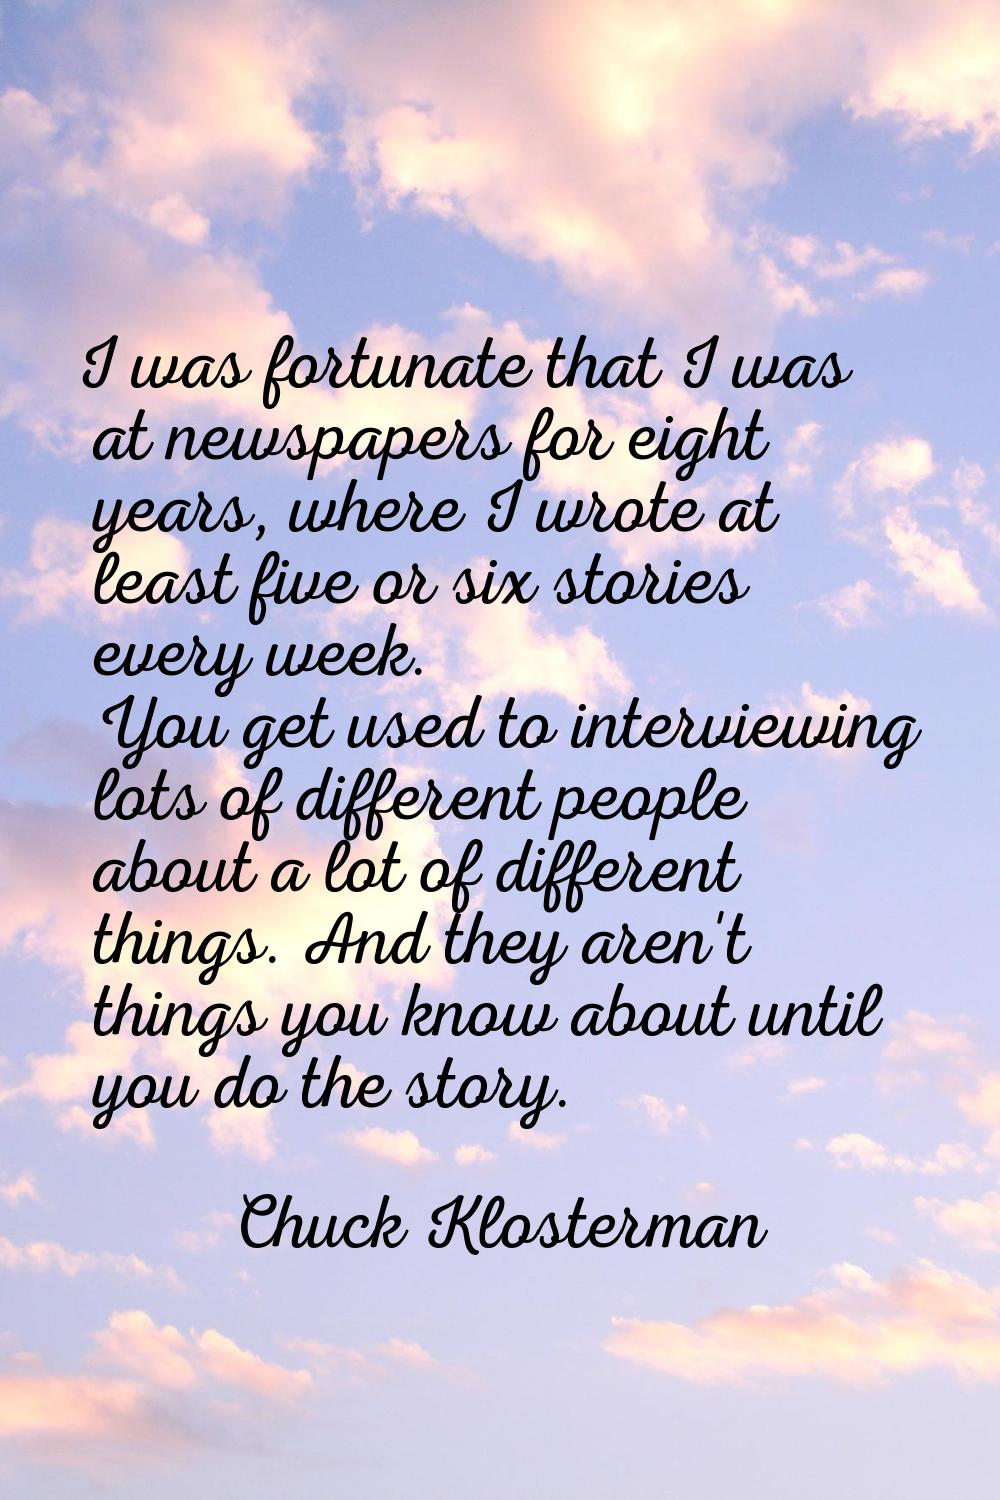 I was fortunate that I was at newspapers for eight years, where I wrote at least five or six storie